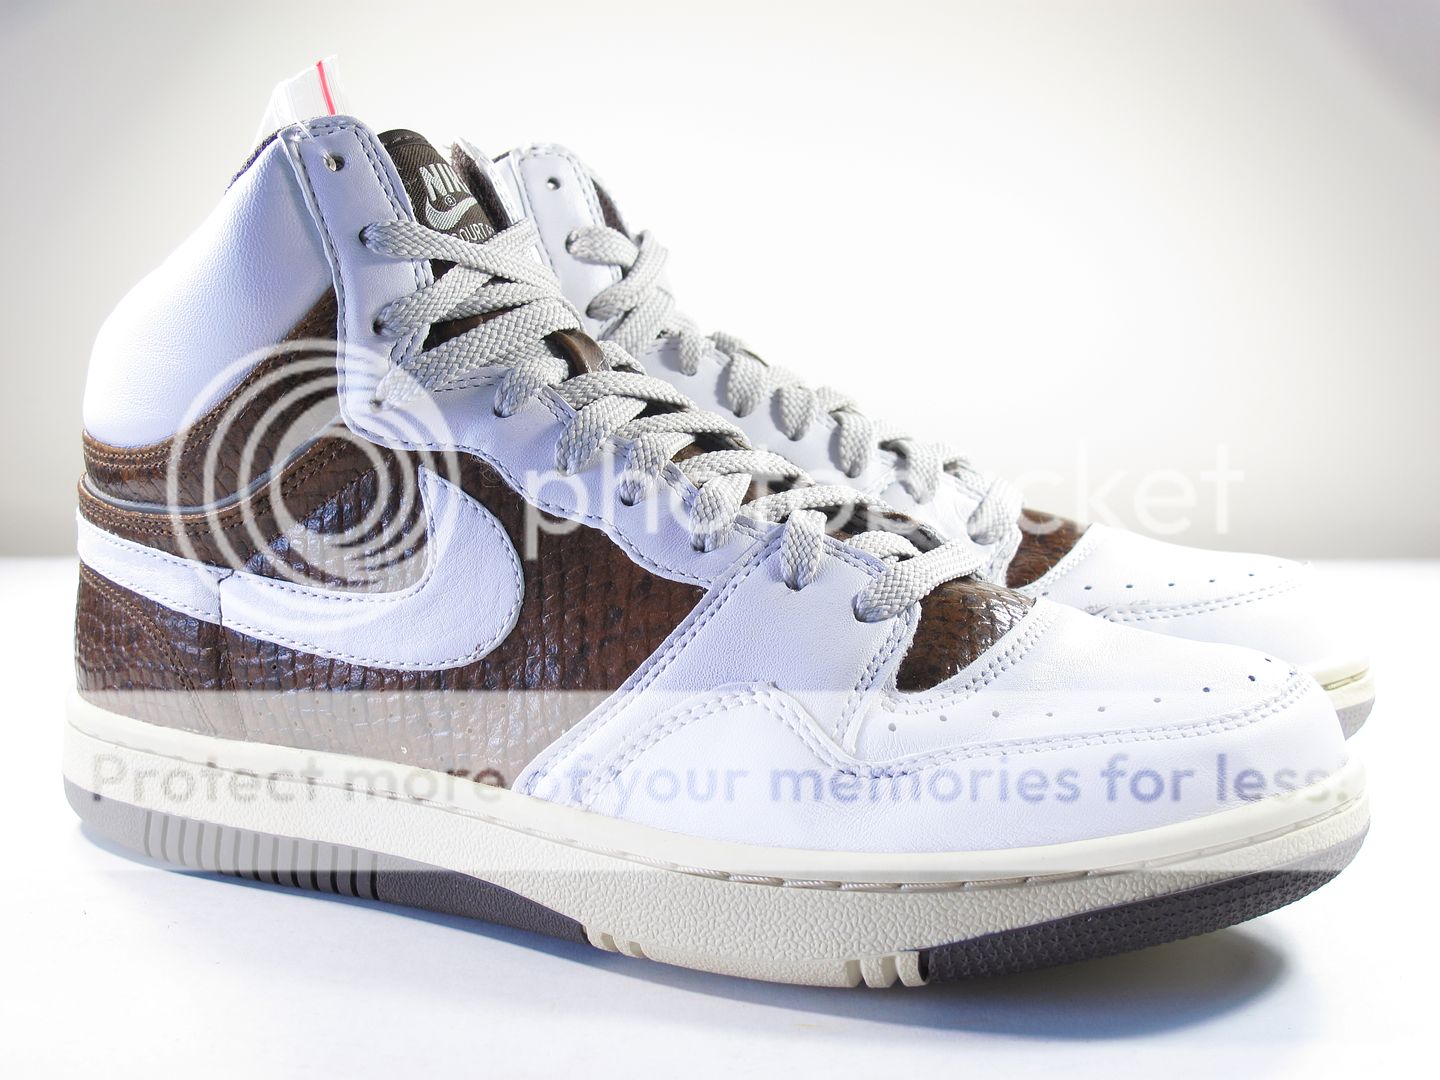 DS NIKE 2007 AIR COURT FORCE PYTHON 10 